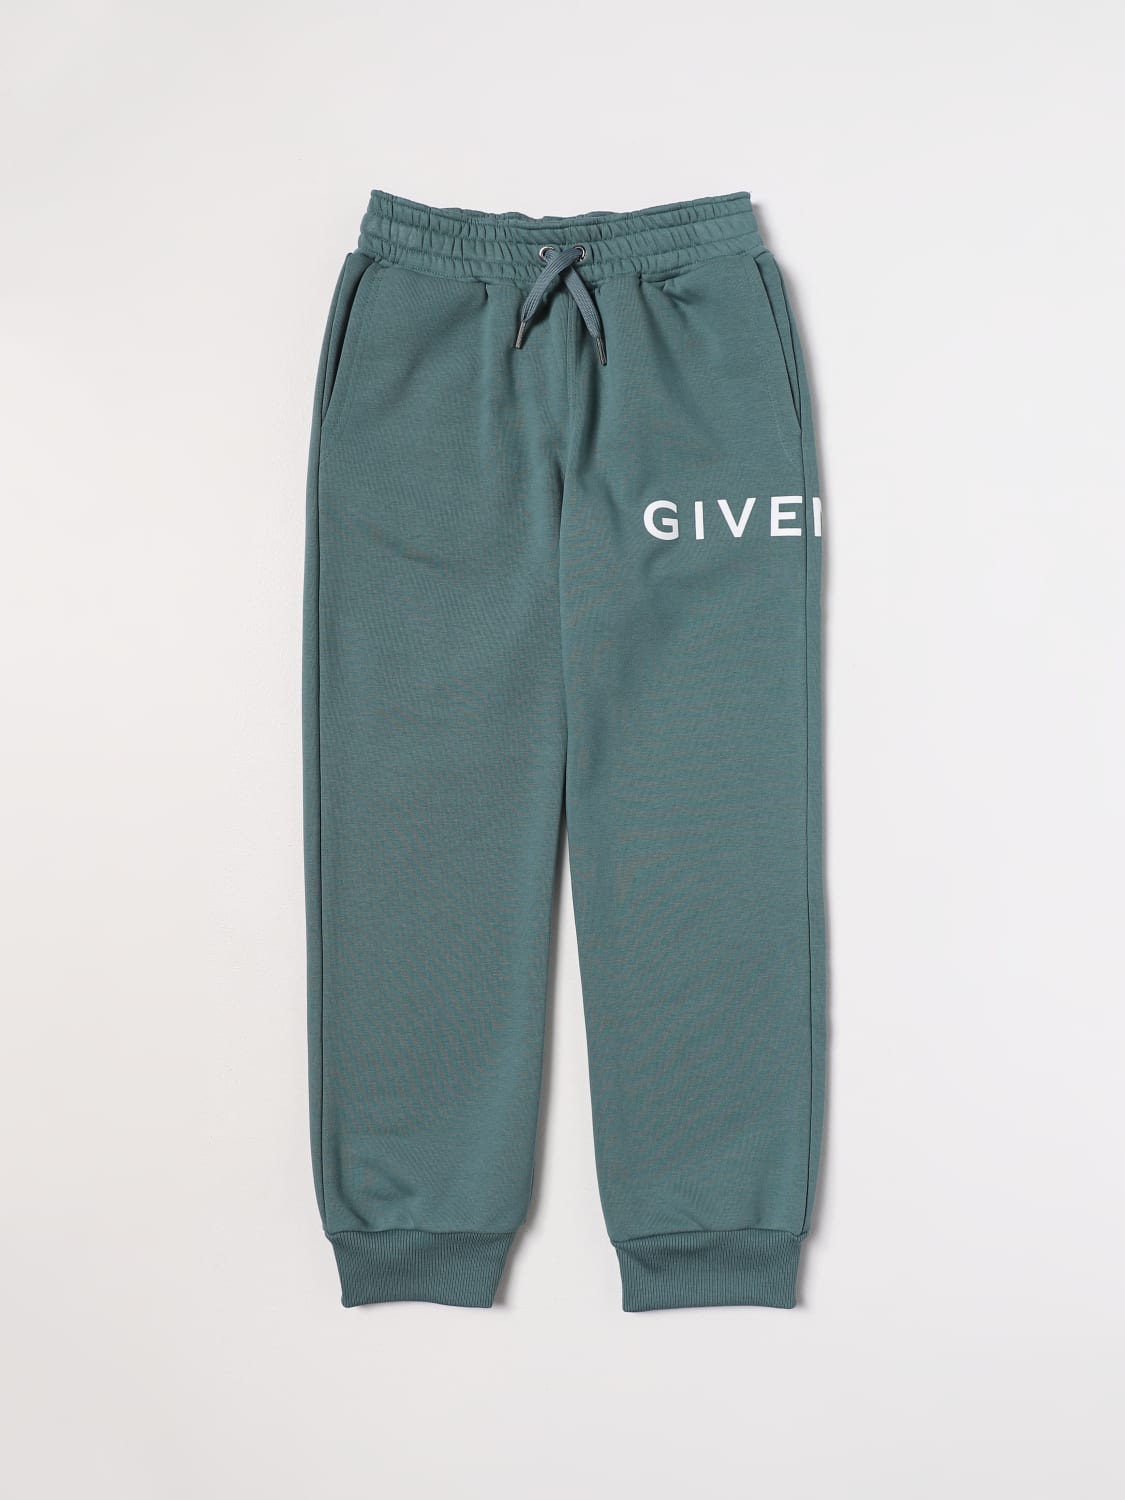 Givenchy pants in printed logo cotton